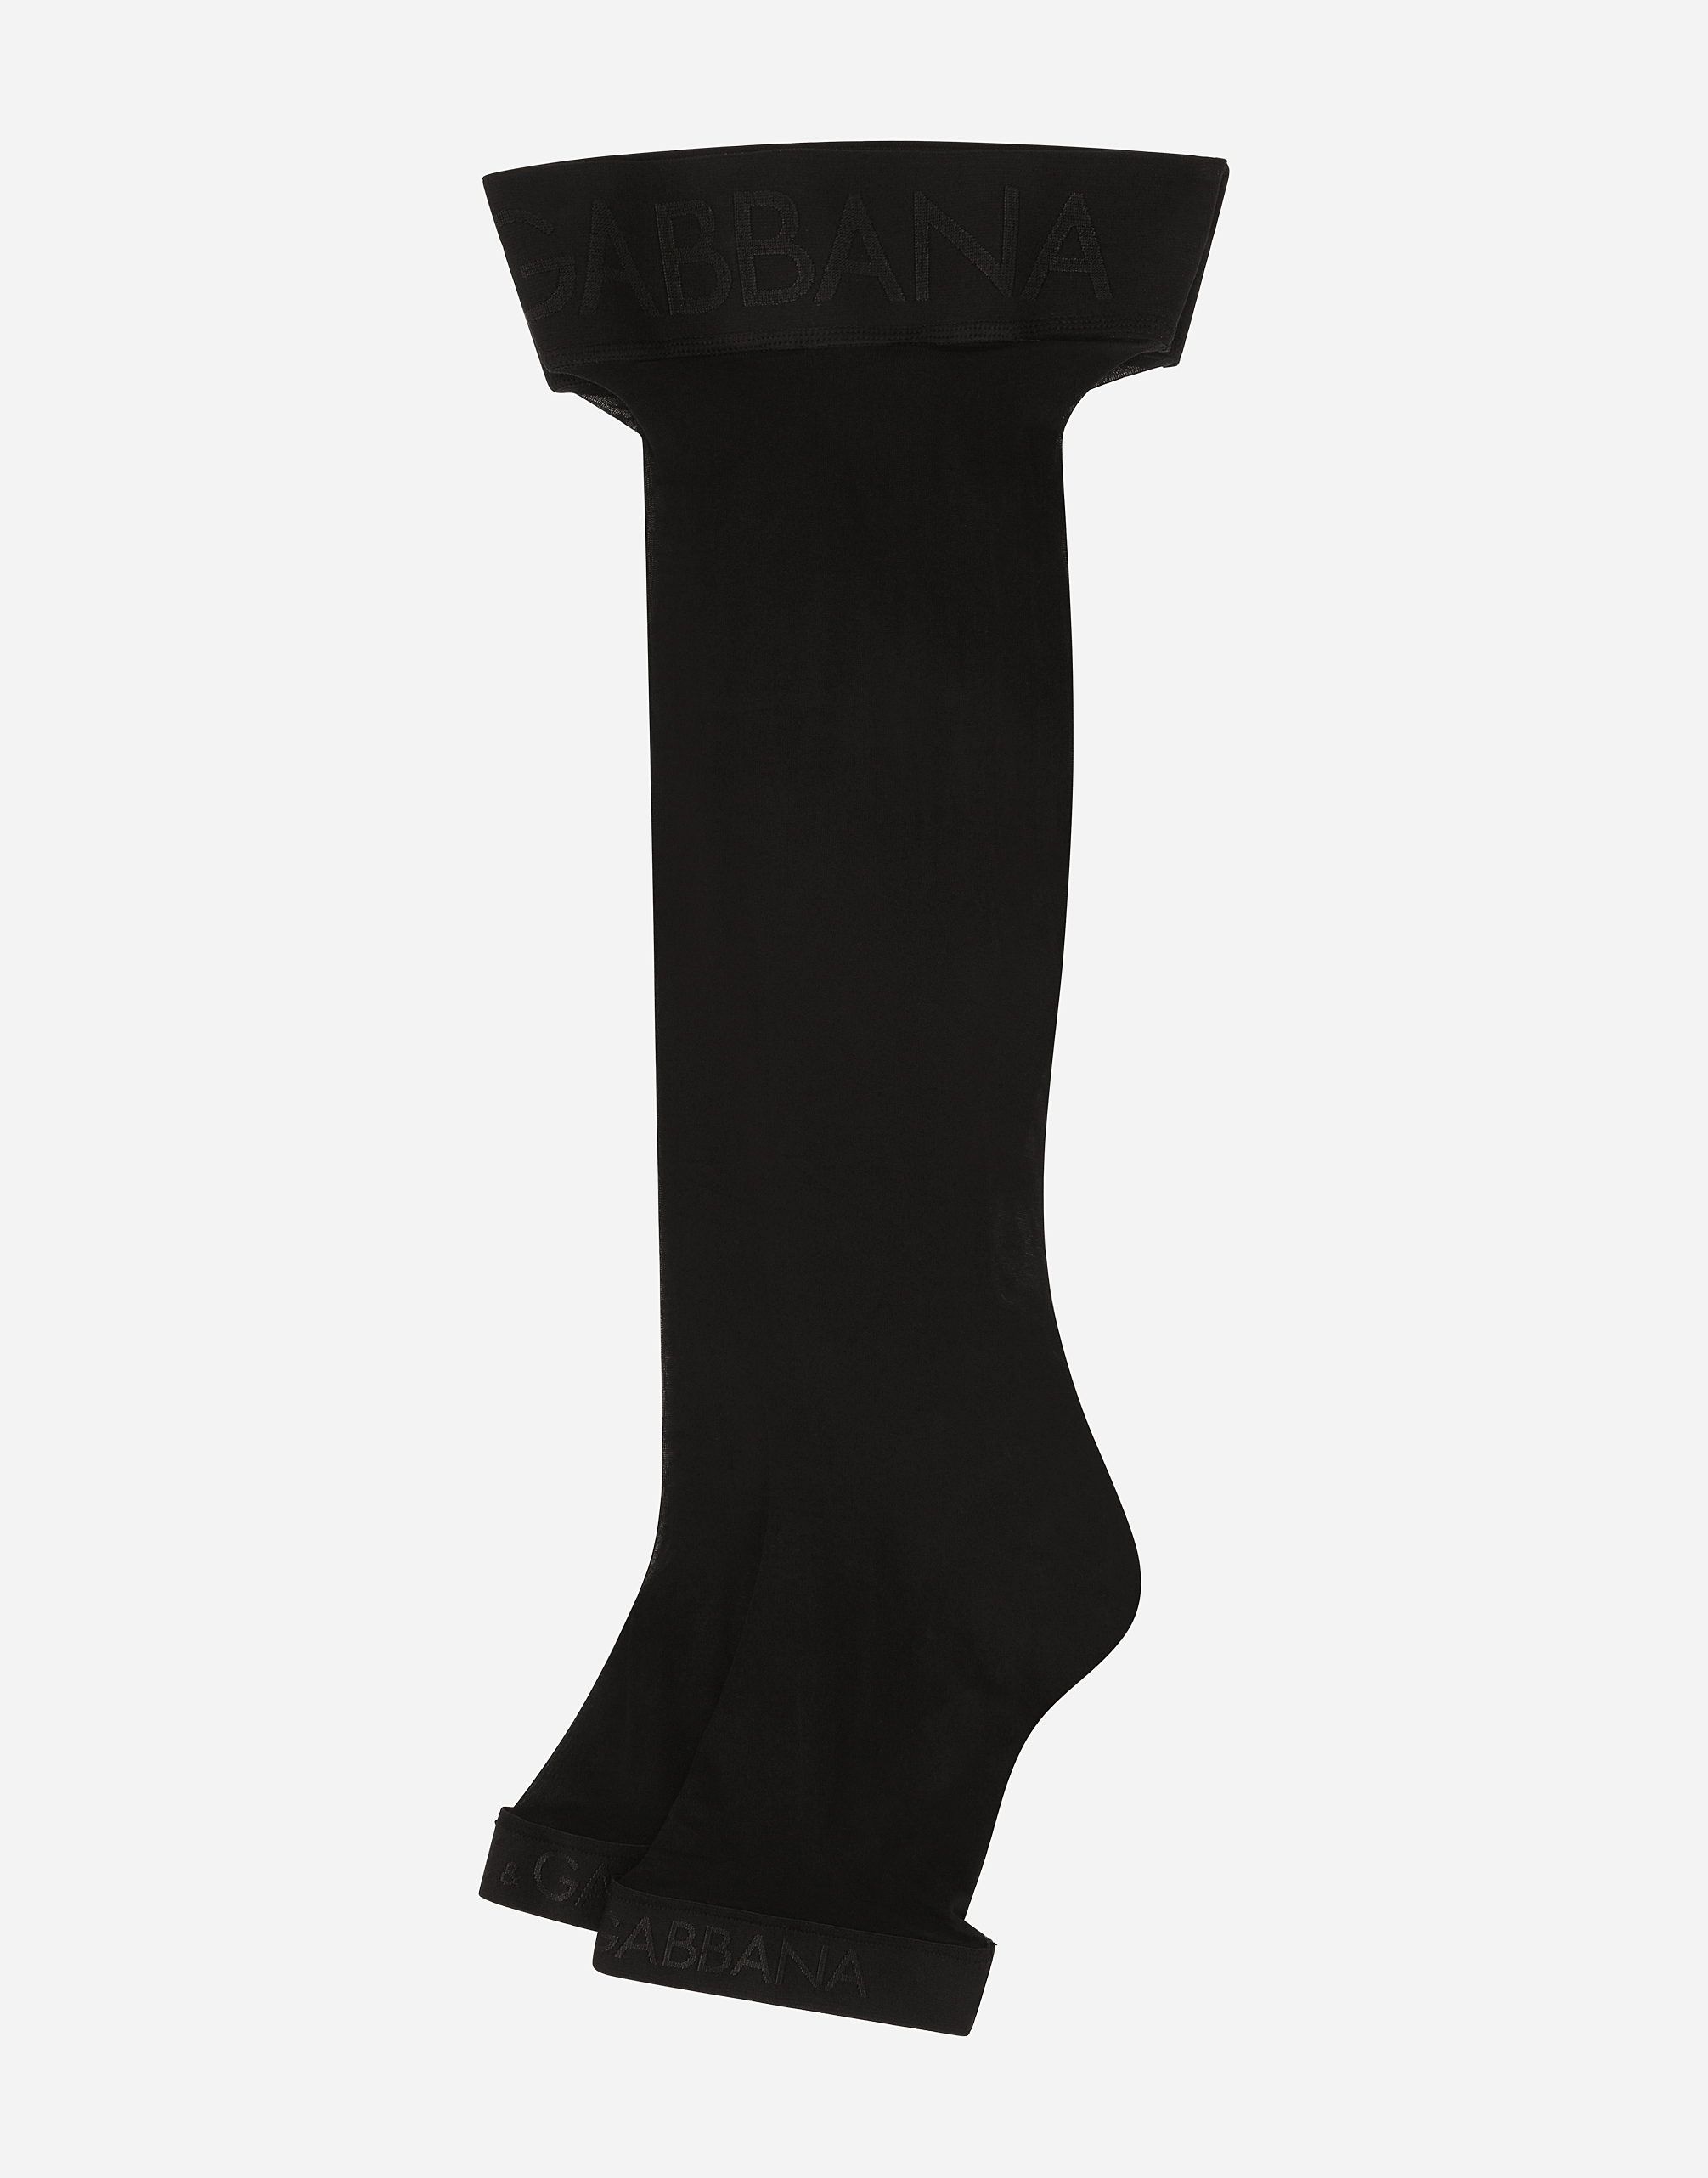 Dolce & Gabbana Hold-up stockings with branded elastic